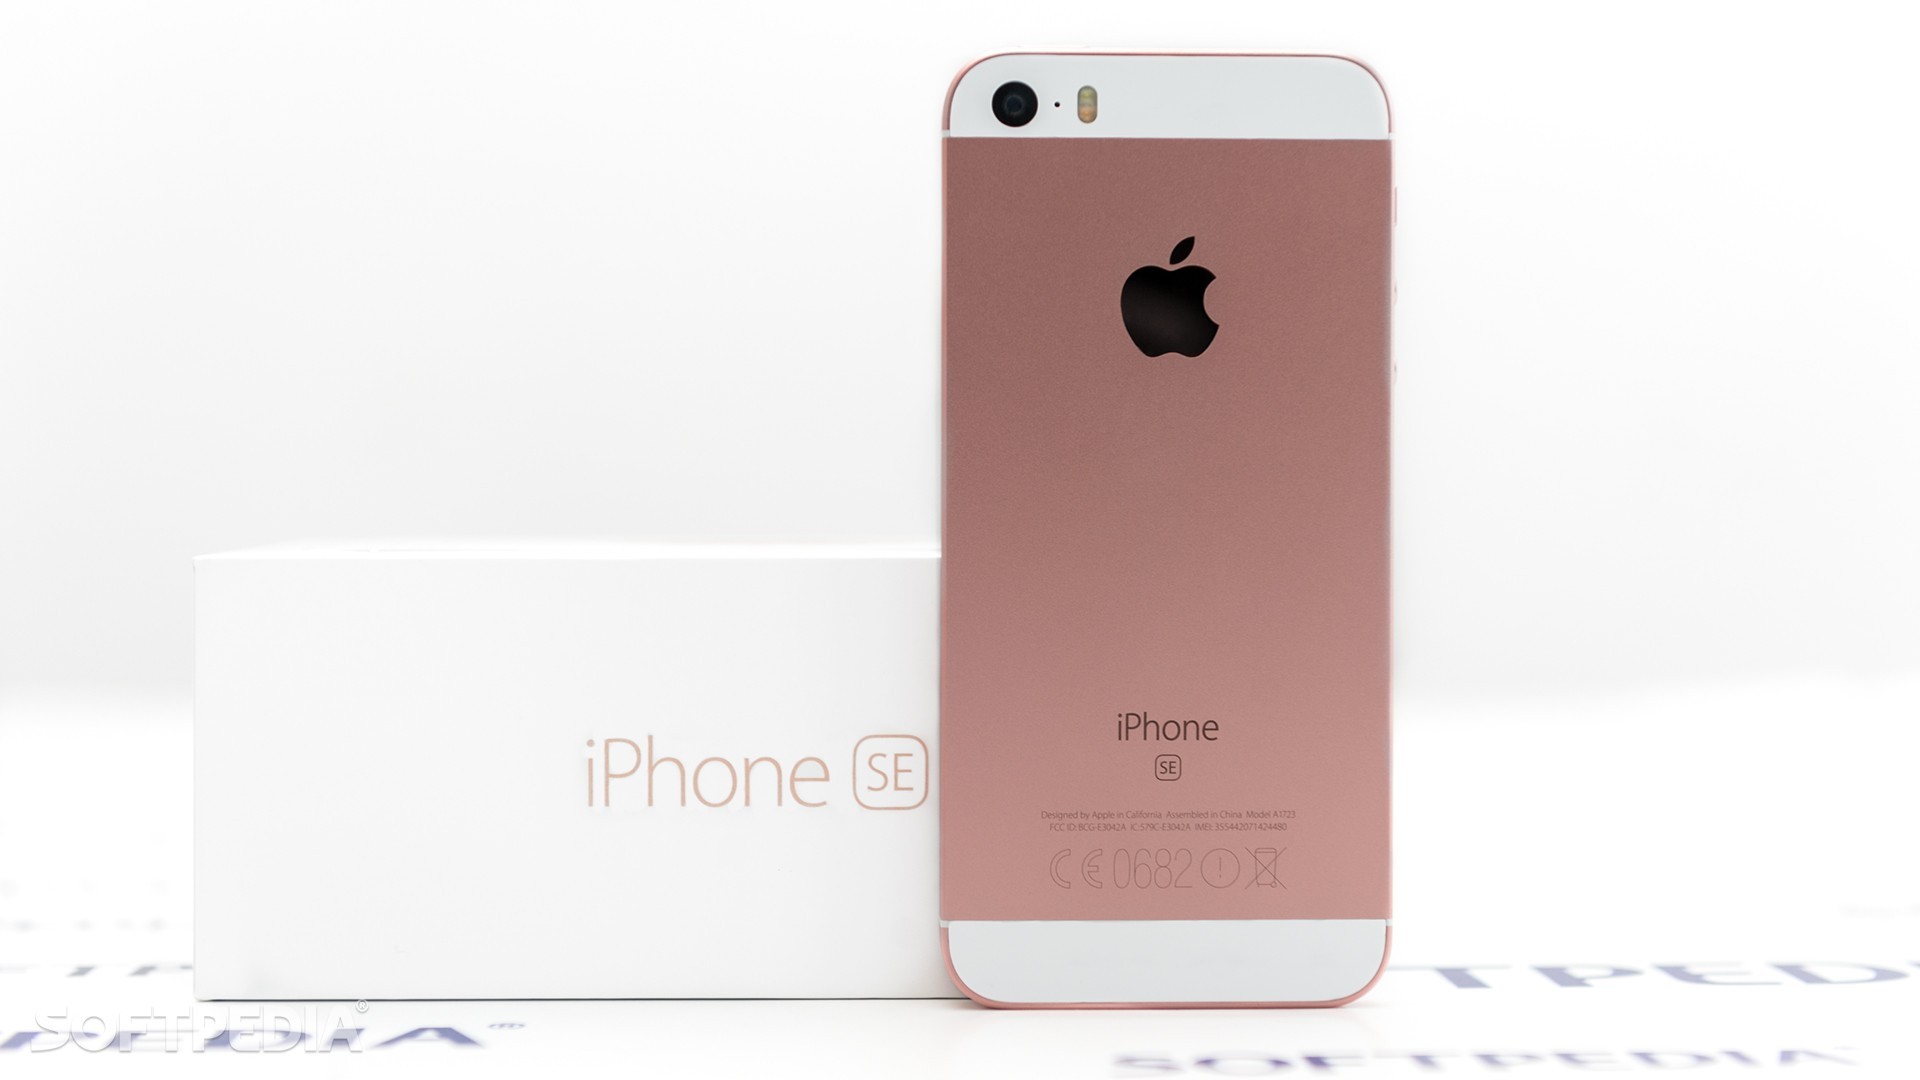 Iphone se goes on sale once again as apple enters panic mode due to poor demand 524617 2